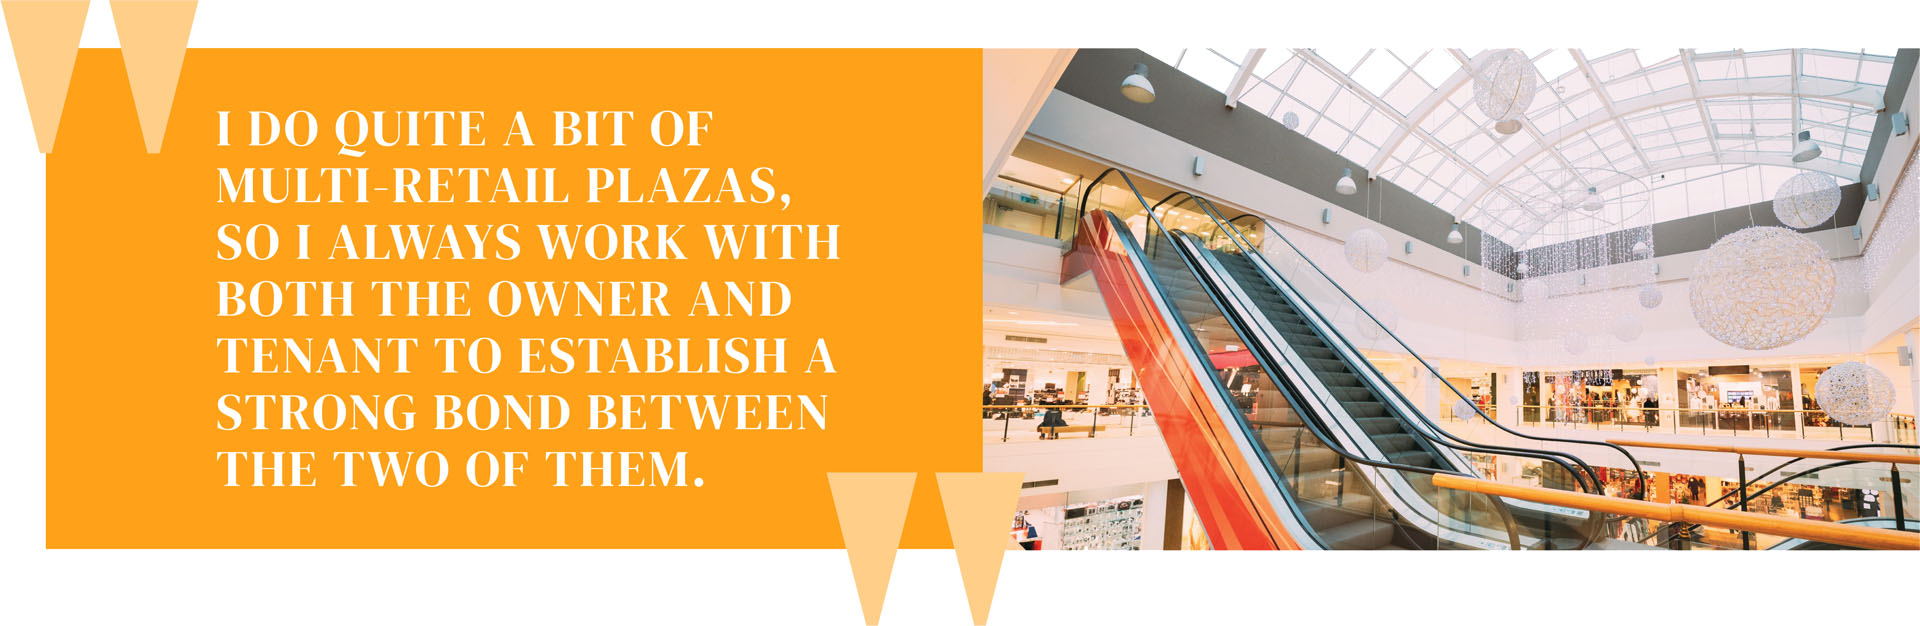 "I do quite a bit of multi-retail plazas, so I always work with both the owner and tenant to establish a strong bond between the two of them."